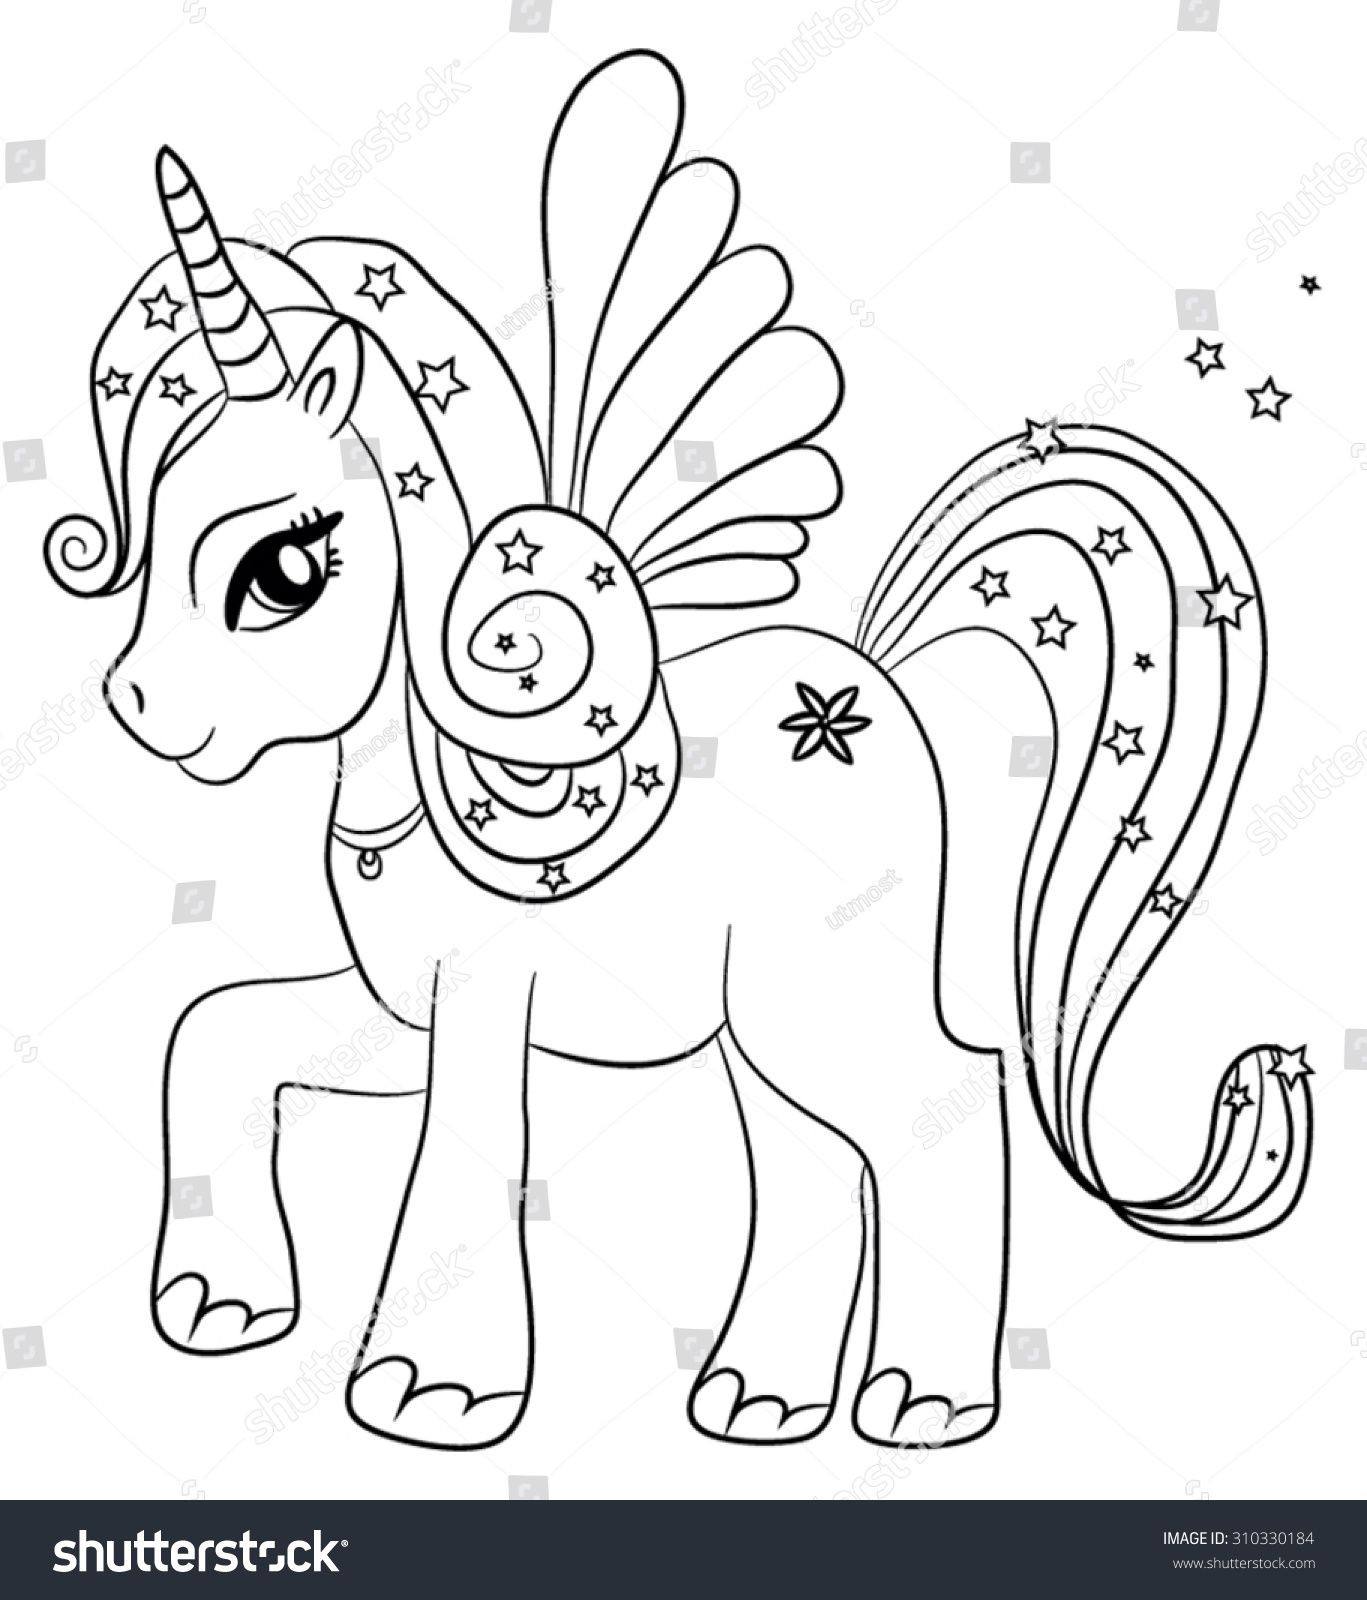 Cute Unicorn Coloring Pages For Kids
 Cute cartoon fairytale unicorn coloring page for kids